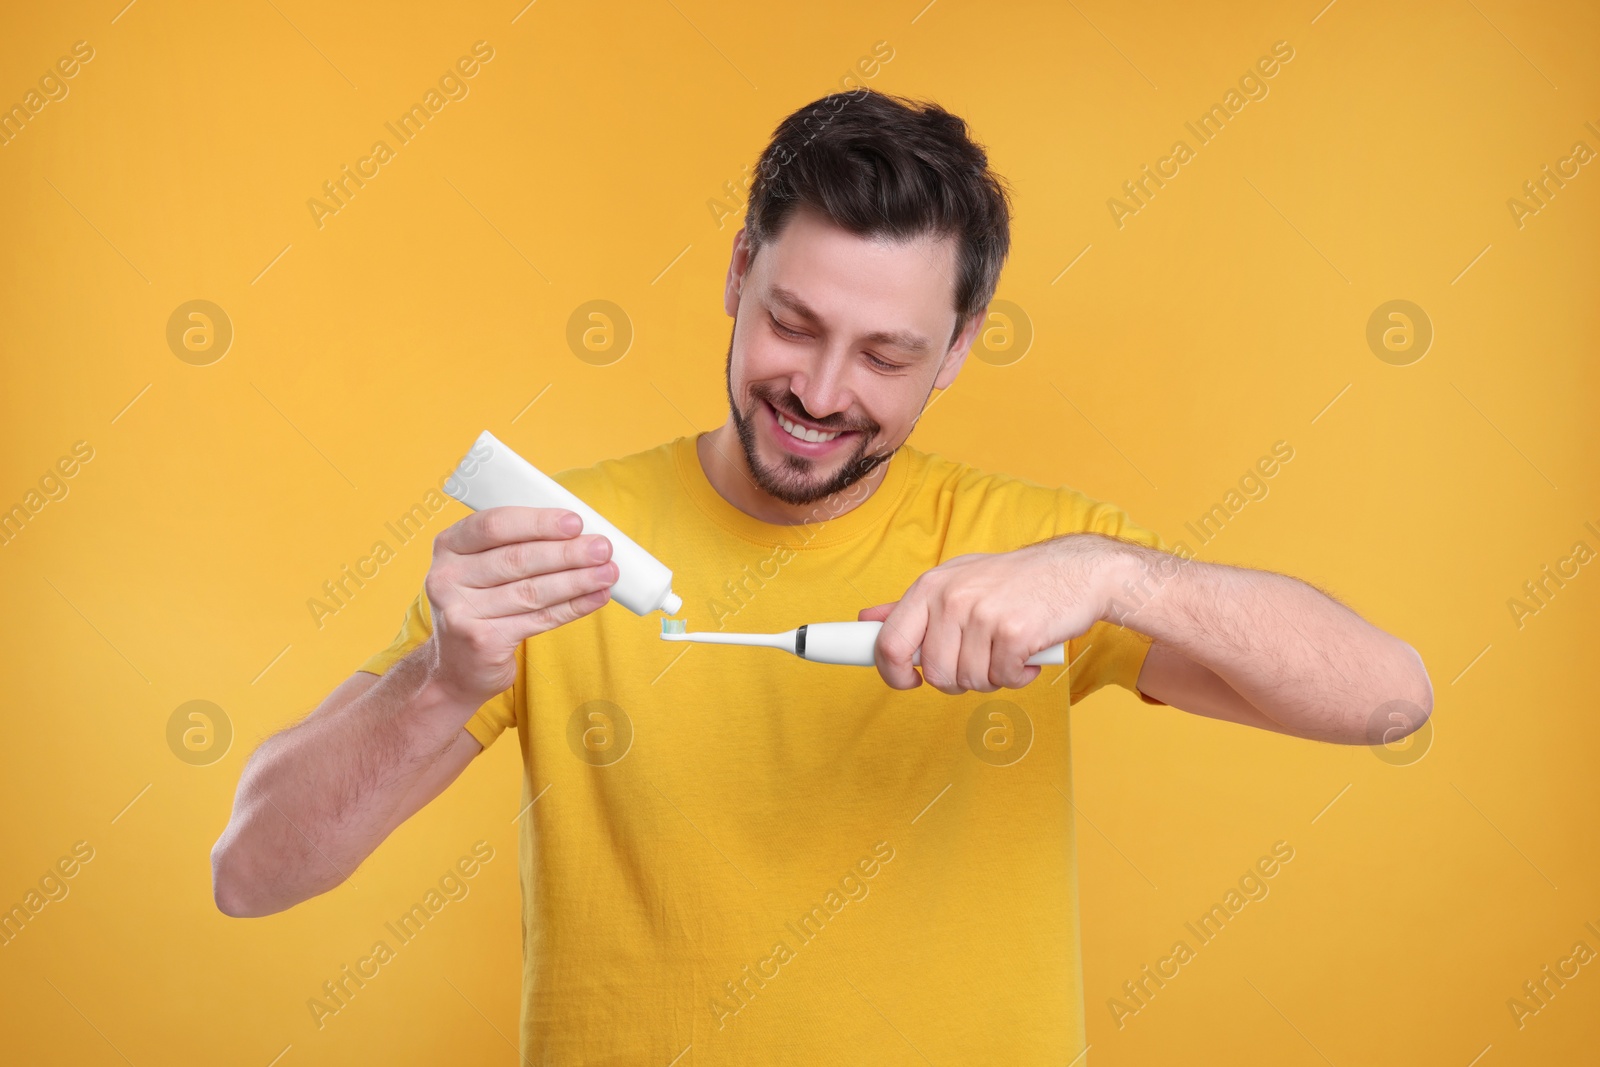 Photo of Happy man squeezing toothpaste from tube onto electric toothbrush on yellow background